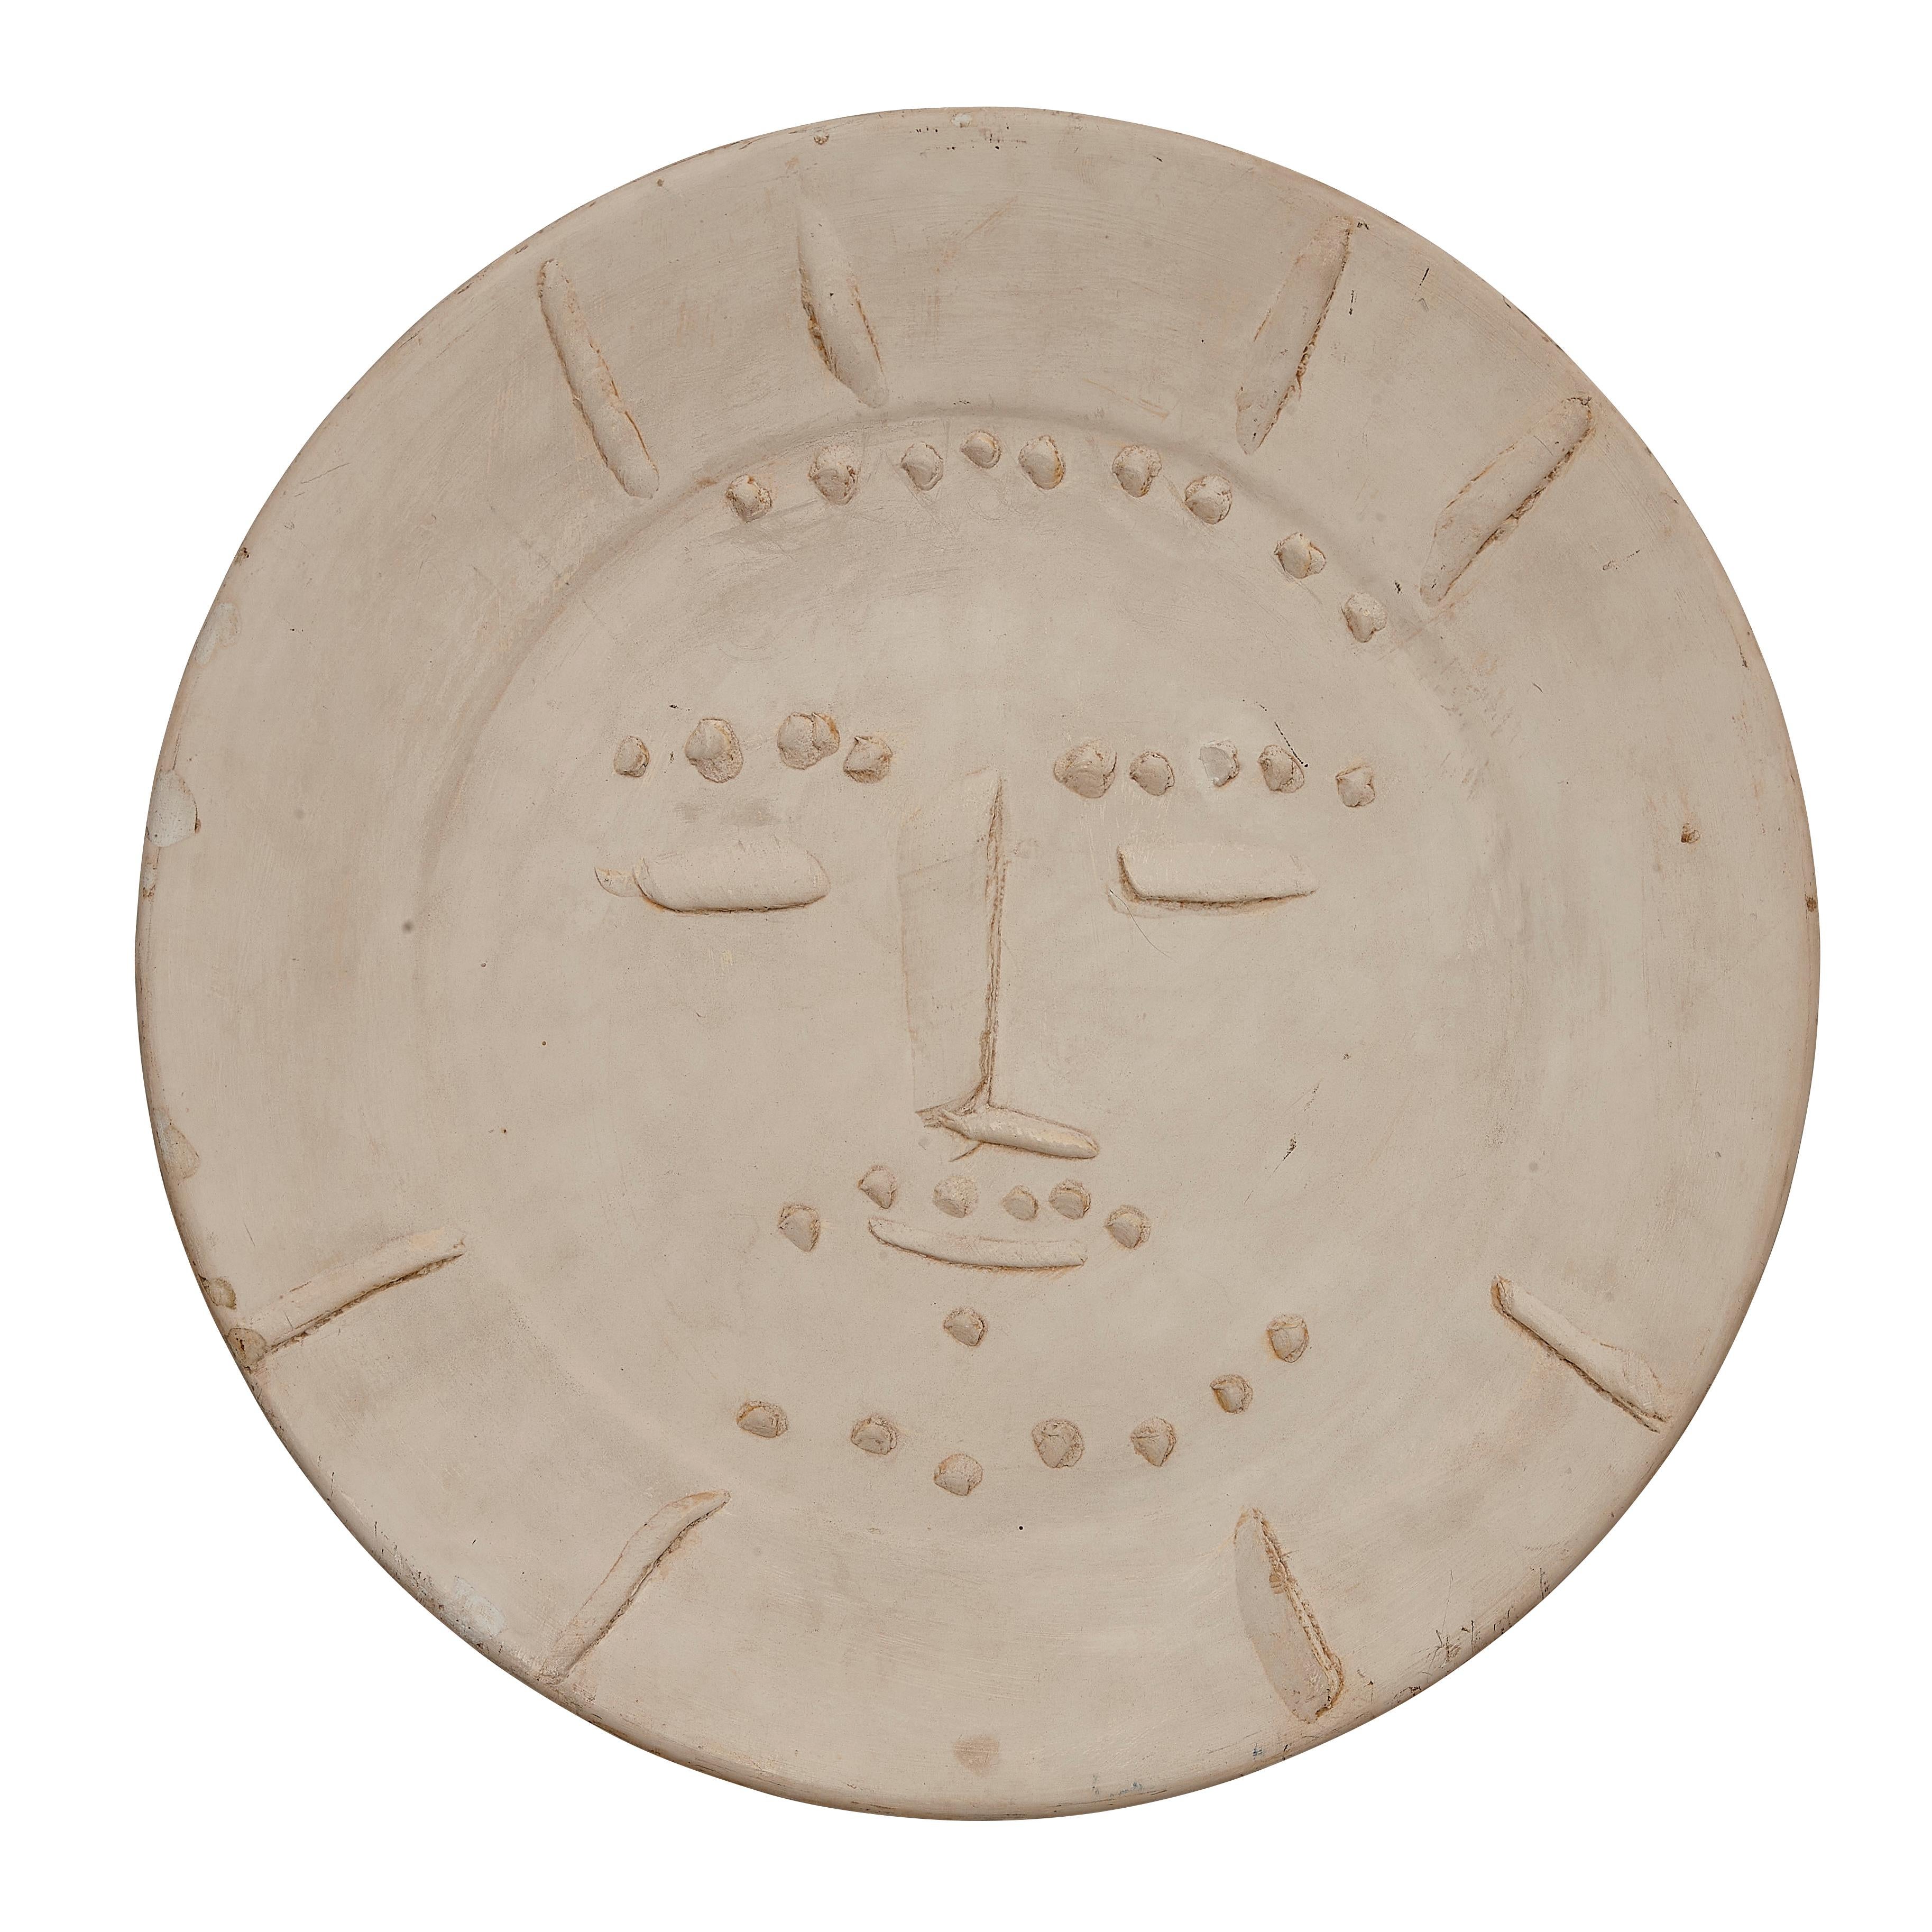 PABLO PICASSO (1881-1973) 
Dormeur (A. R. 343)

Terre de faïence plate, 1956, an unnumbered example aside from the edition of 100, this plate was used as the mould for Ateliers Hugo's creation of the corresponding repoussée silver plate, with the